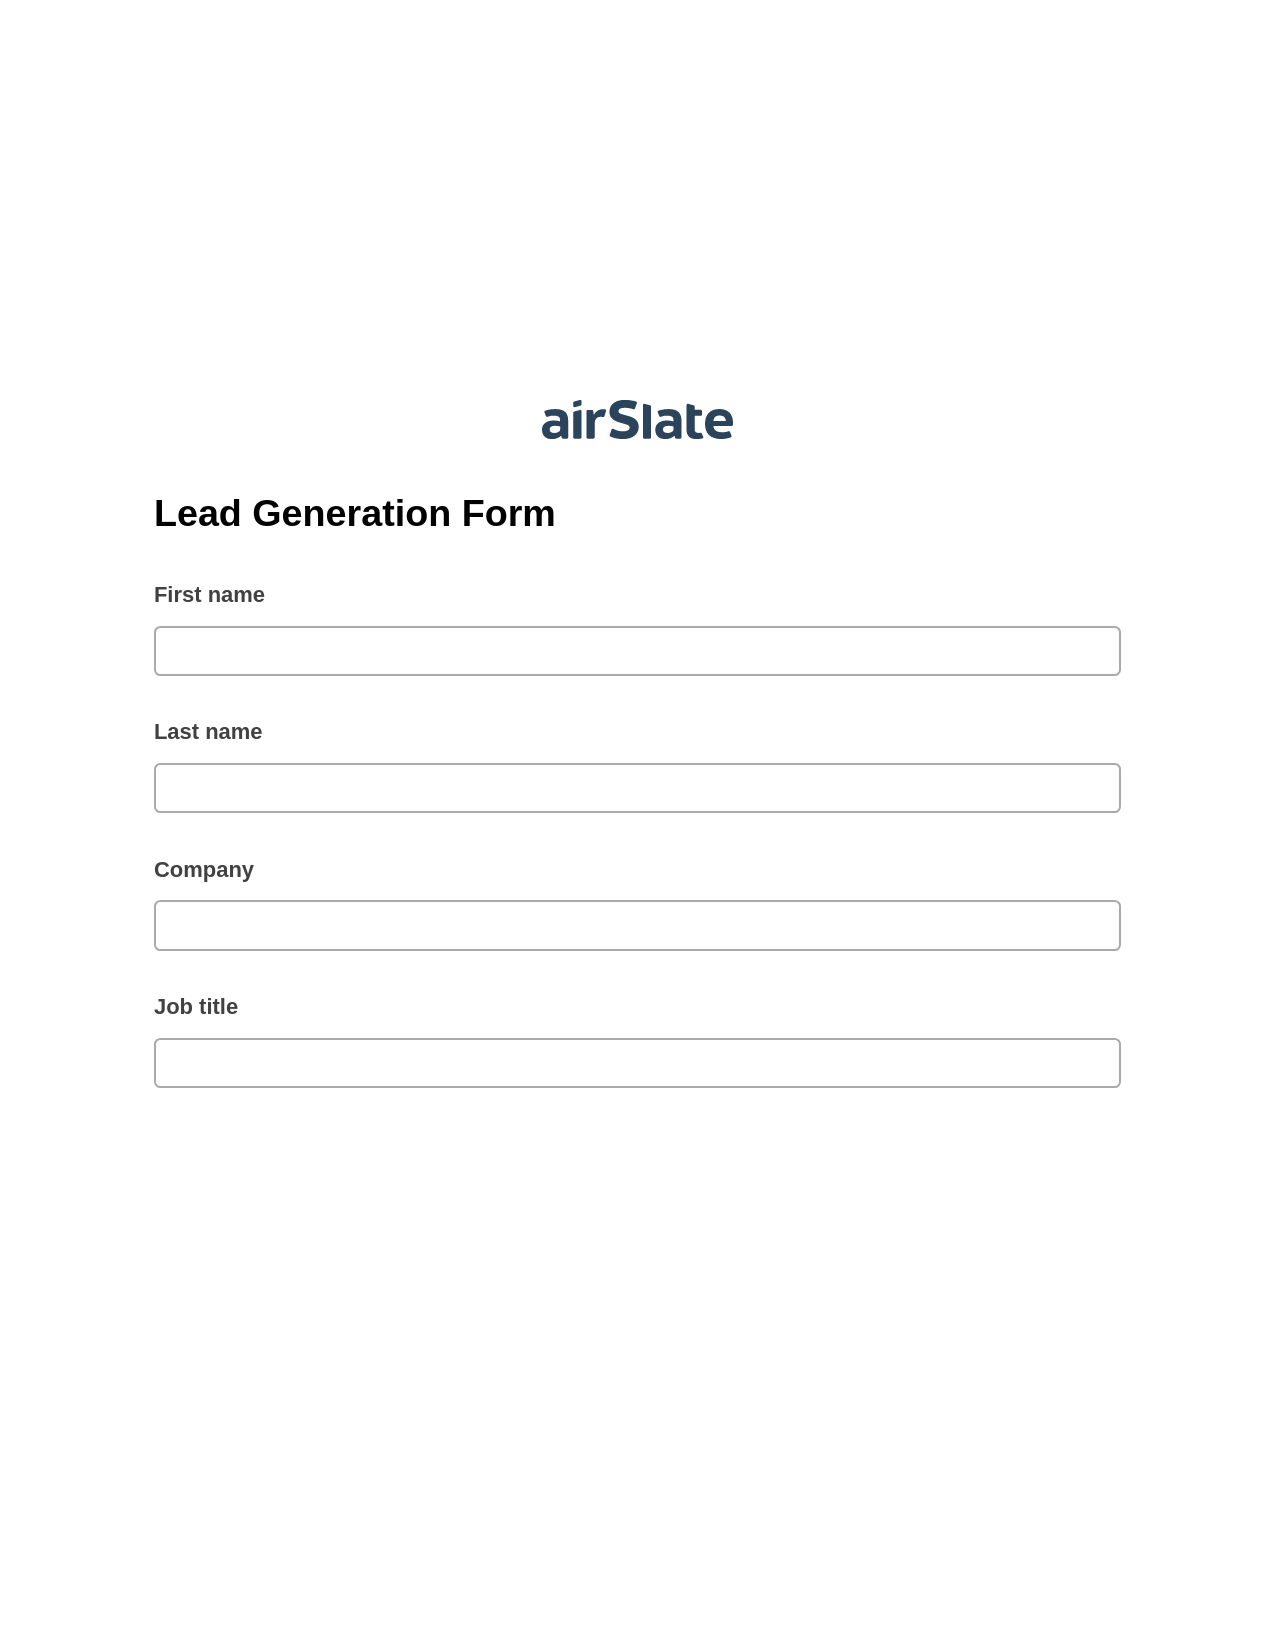 Lead Generation Form Pre-fill Document Bot, Rename Slate Bot, Archive to Dropbox Bot